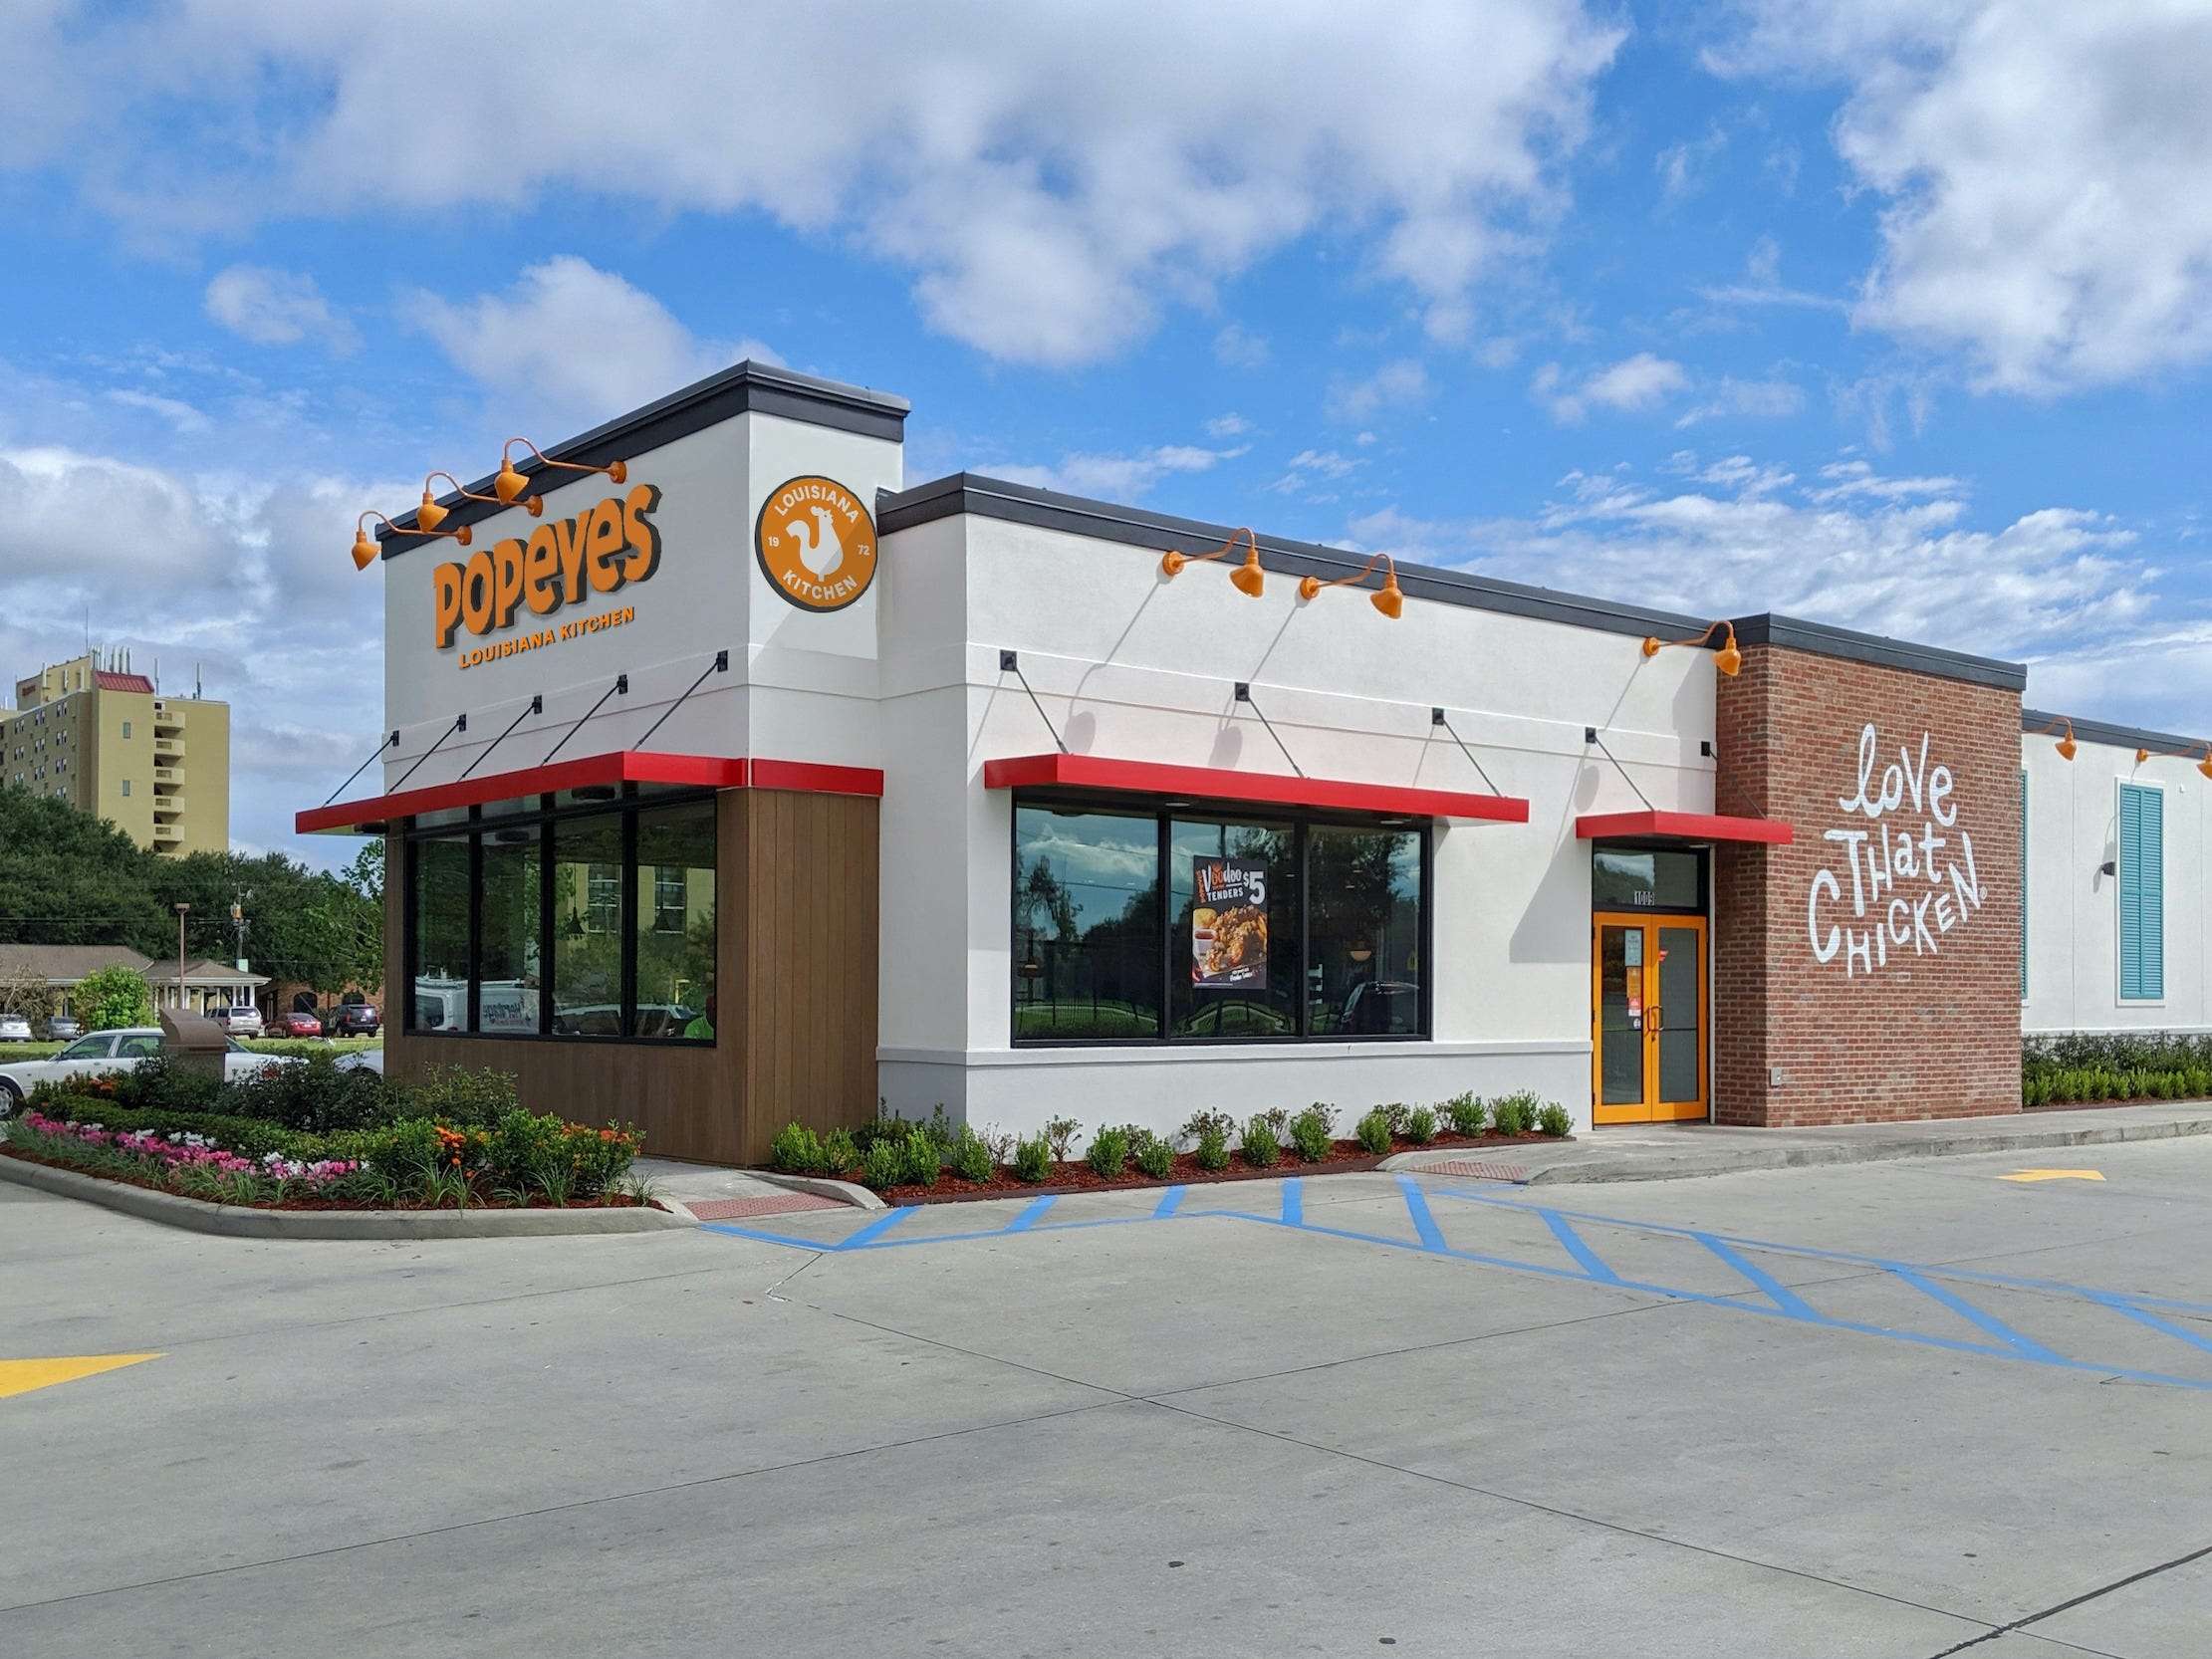 Popeyes revamps its logo and restaurant design as it sets its sights on